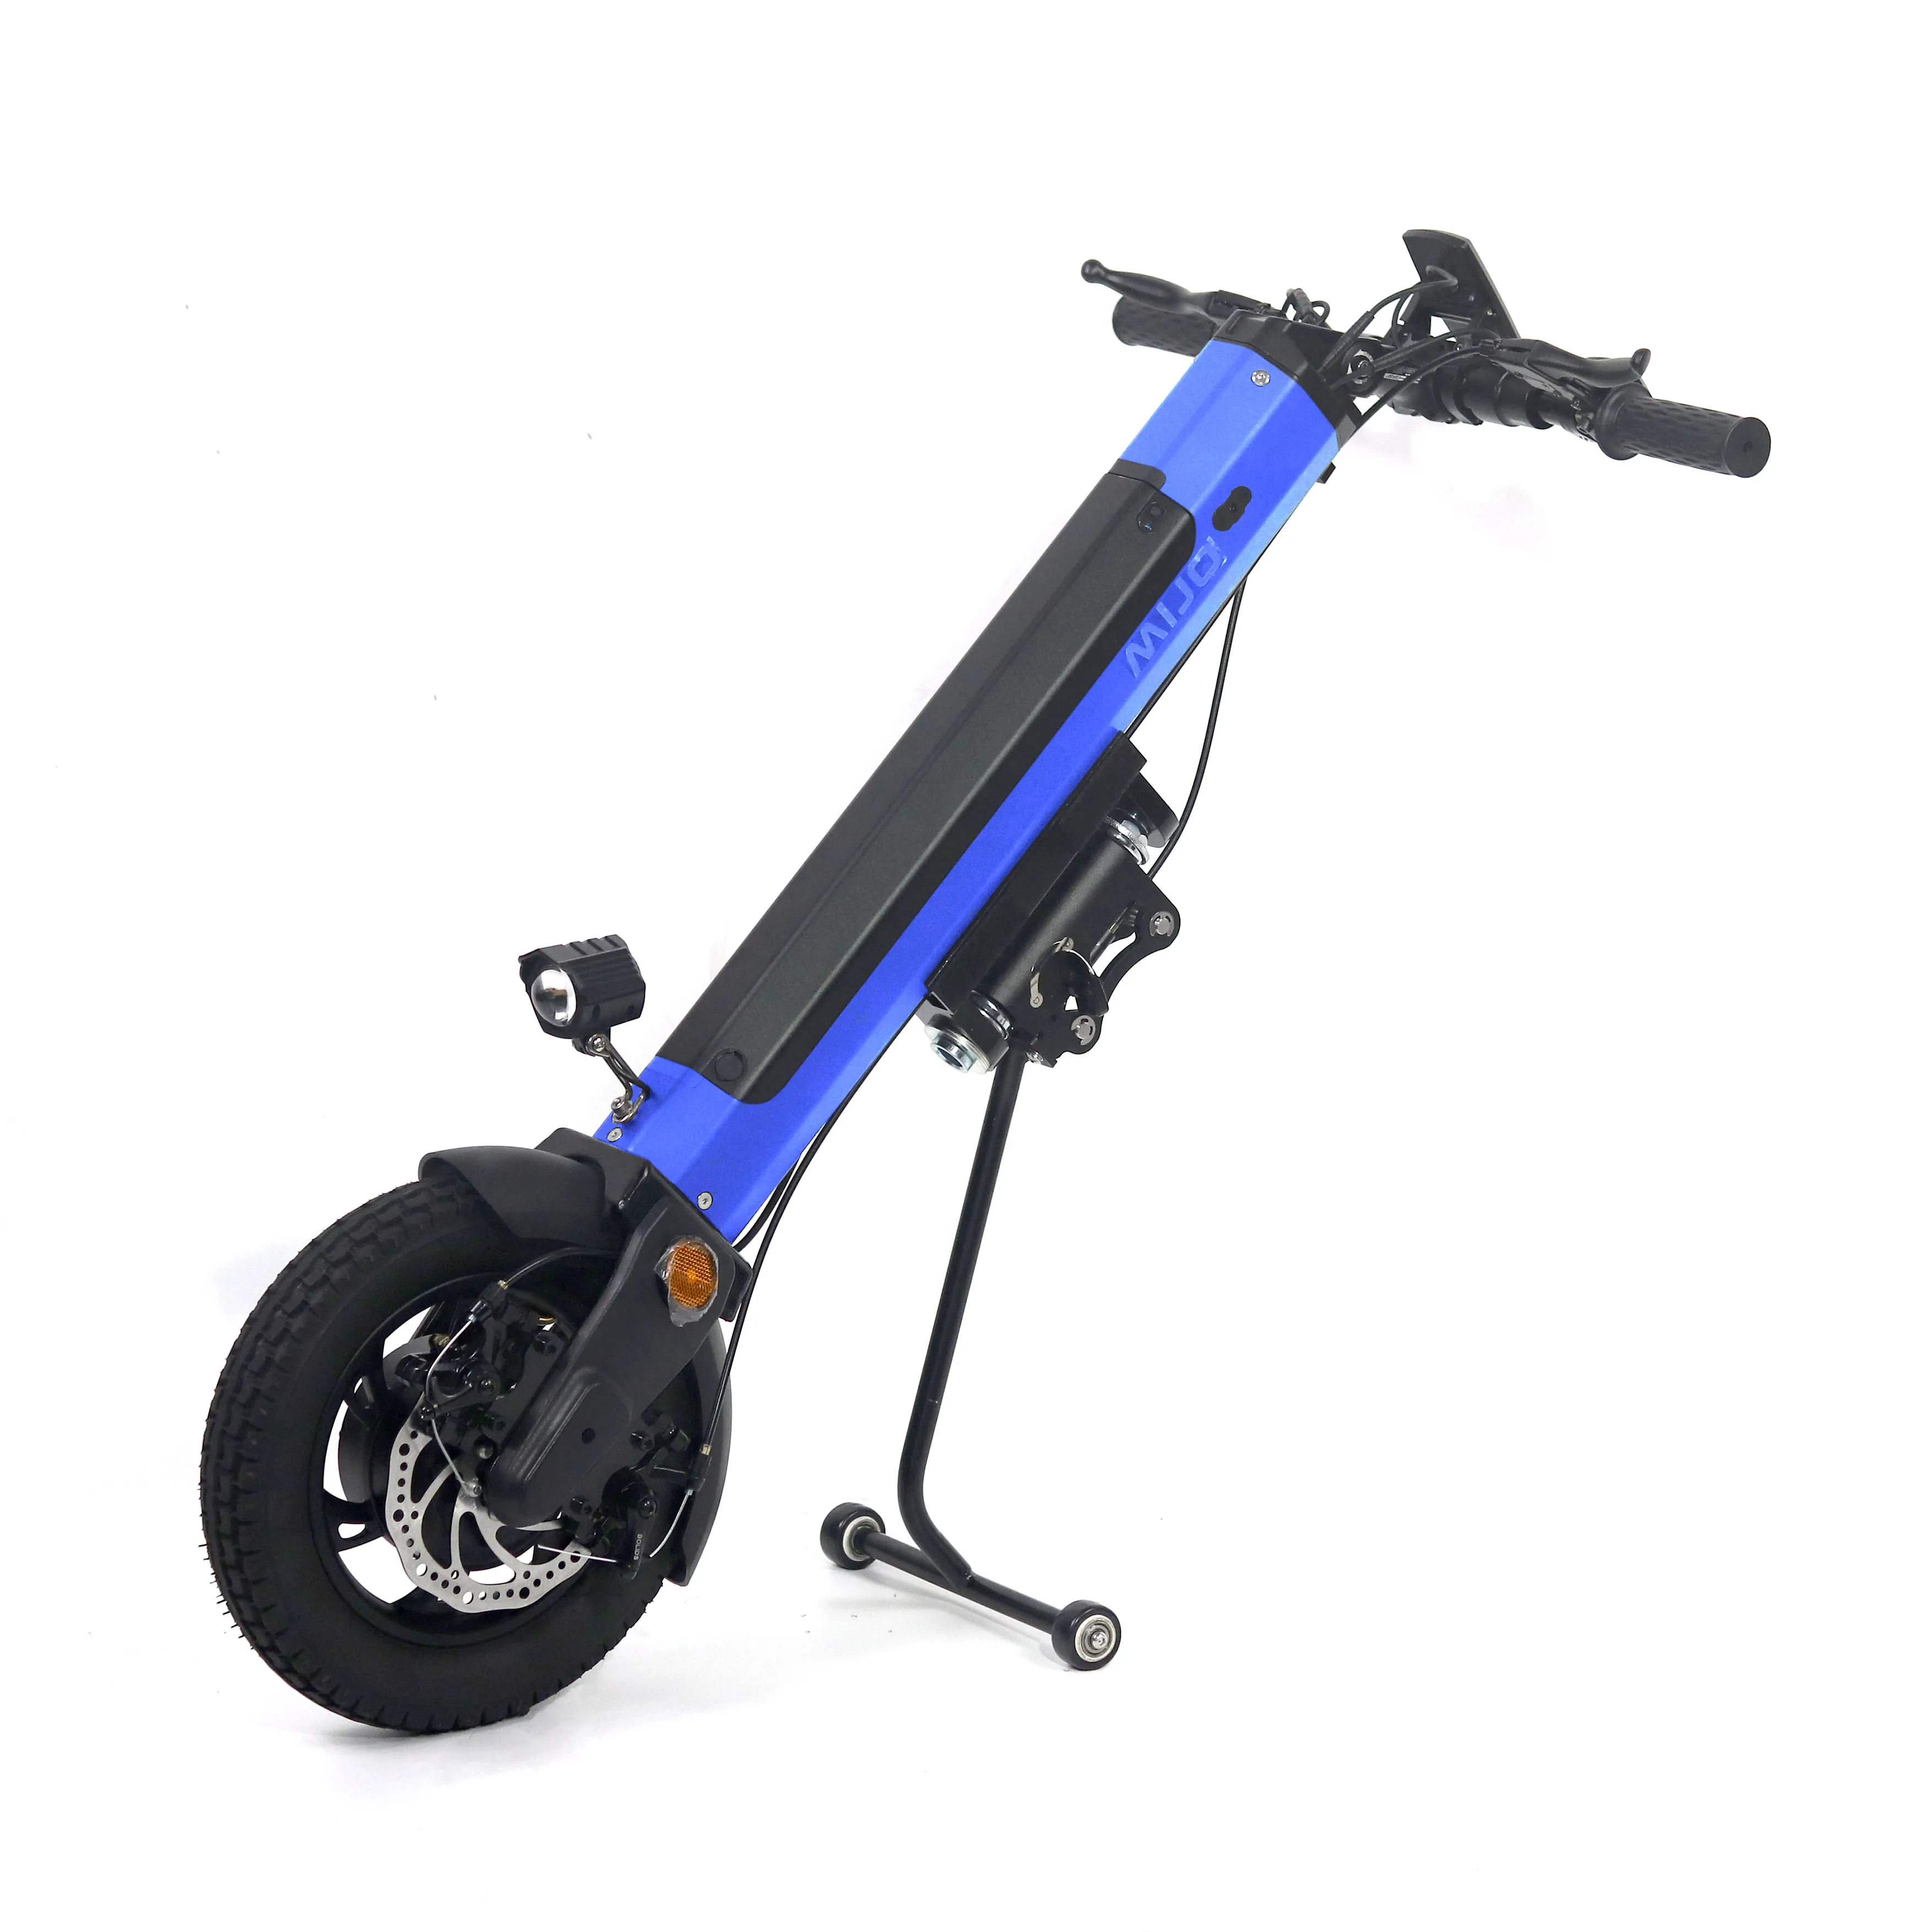 Portable and Comfortable Electric Handcycle Wheelchair Attachment 350W Wheelchair Drive Head with 36V 13Ah Lithium battery samebike 20lvxd30 electric bike 48v 350w 10 4ah battery max speed 35km h